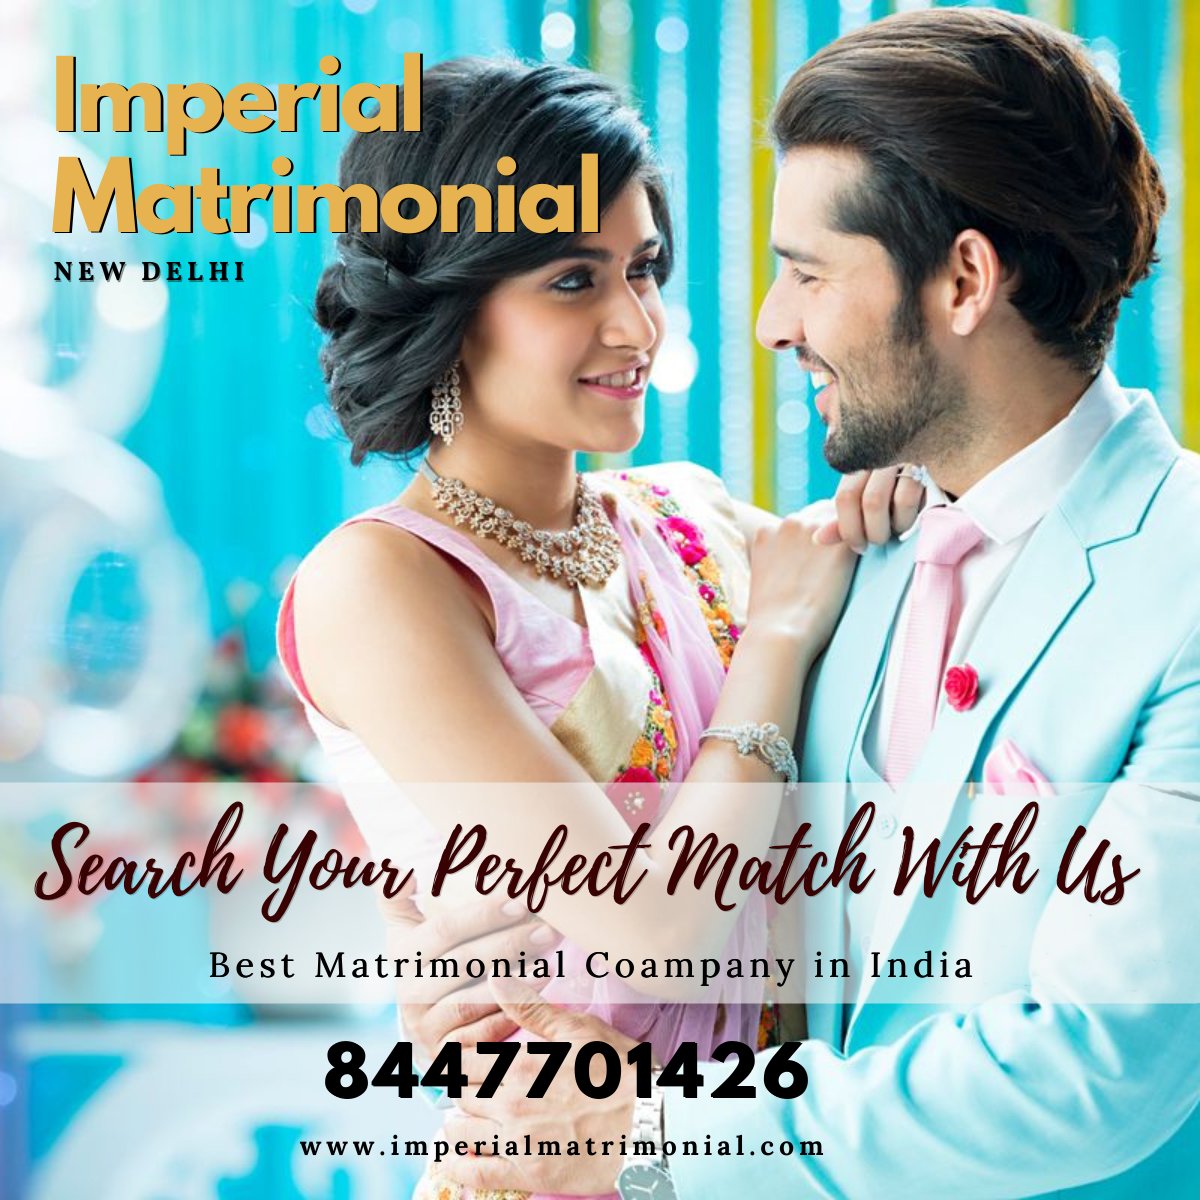 Imperial Matrimonial has provided match-making services to first-class professionals and renowned business houses of Indian origin to match their special life partners.

Imperial Matrimonial
New Delhi
Mobile: 8447701426

#dreamwedding #dreamgirl #Perfect #lookingforbride #bride